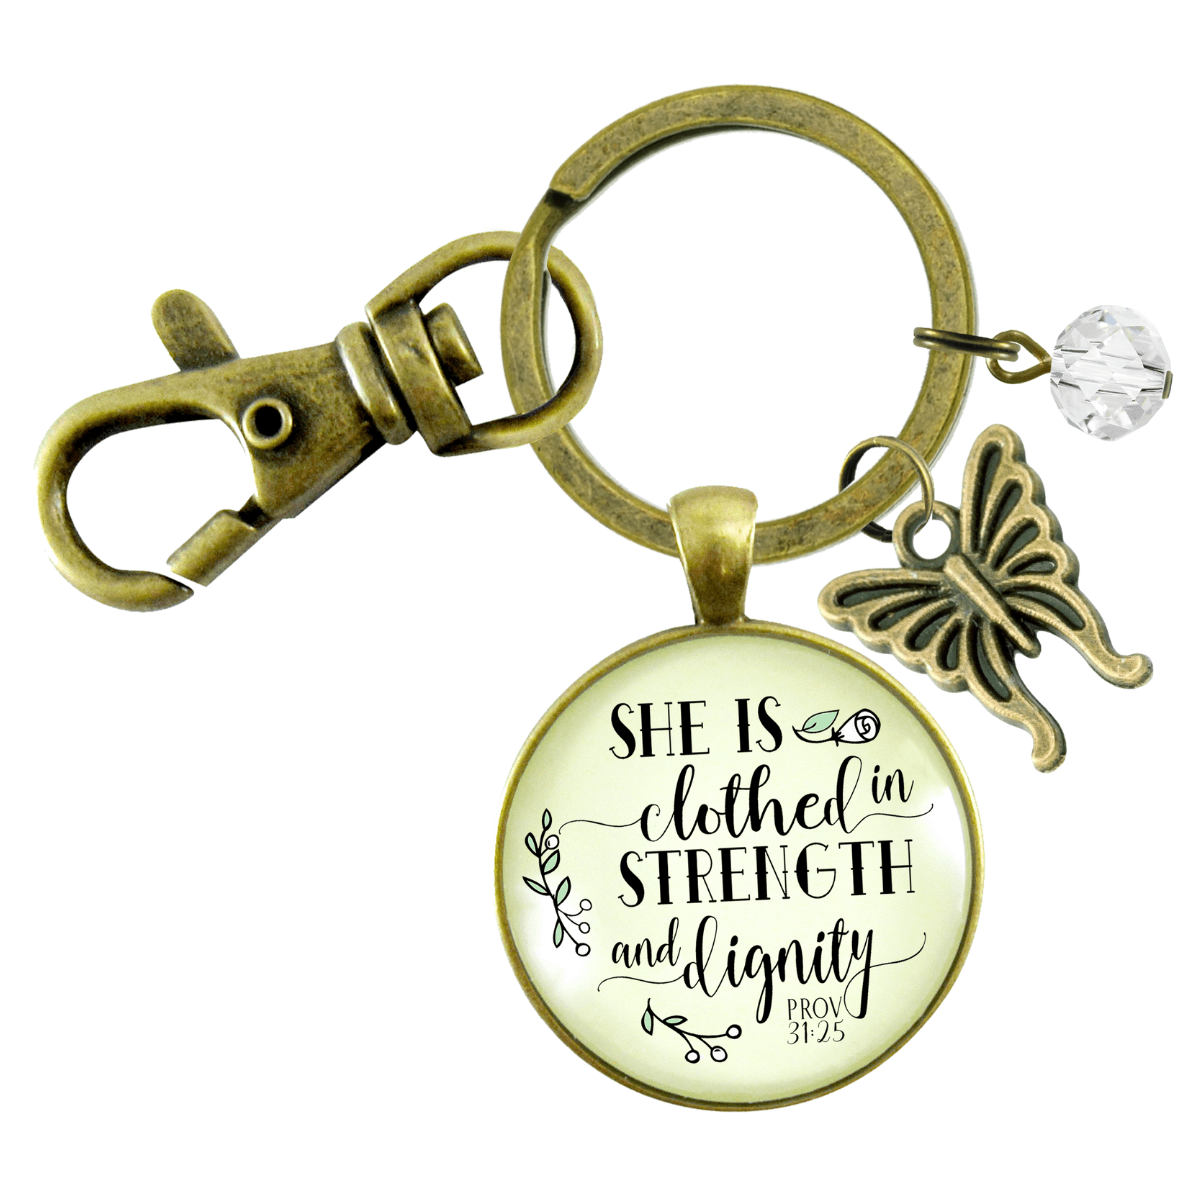 Faith Keychain She is Clothed Strength Dignity Women of Truth Proverb 31 Believer Gift - Gutsy Goodness Handmade Jewelry;Faith Keychain She Is Clothed Strength Dignity Women Of Truth Proverb 31 Believer Gift - Gutsy Goodness Handmade Jewelry Gifts